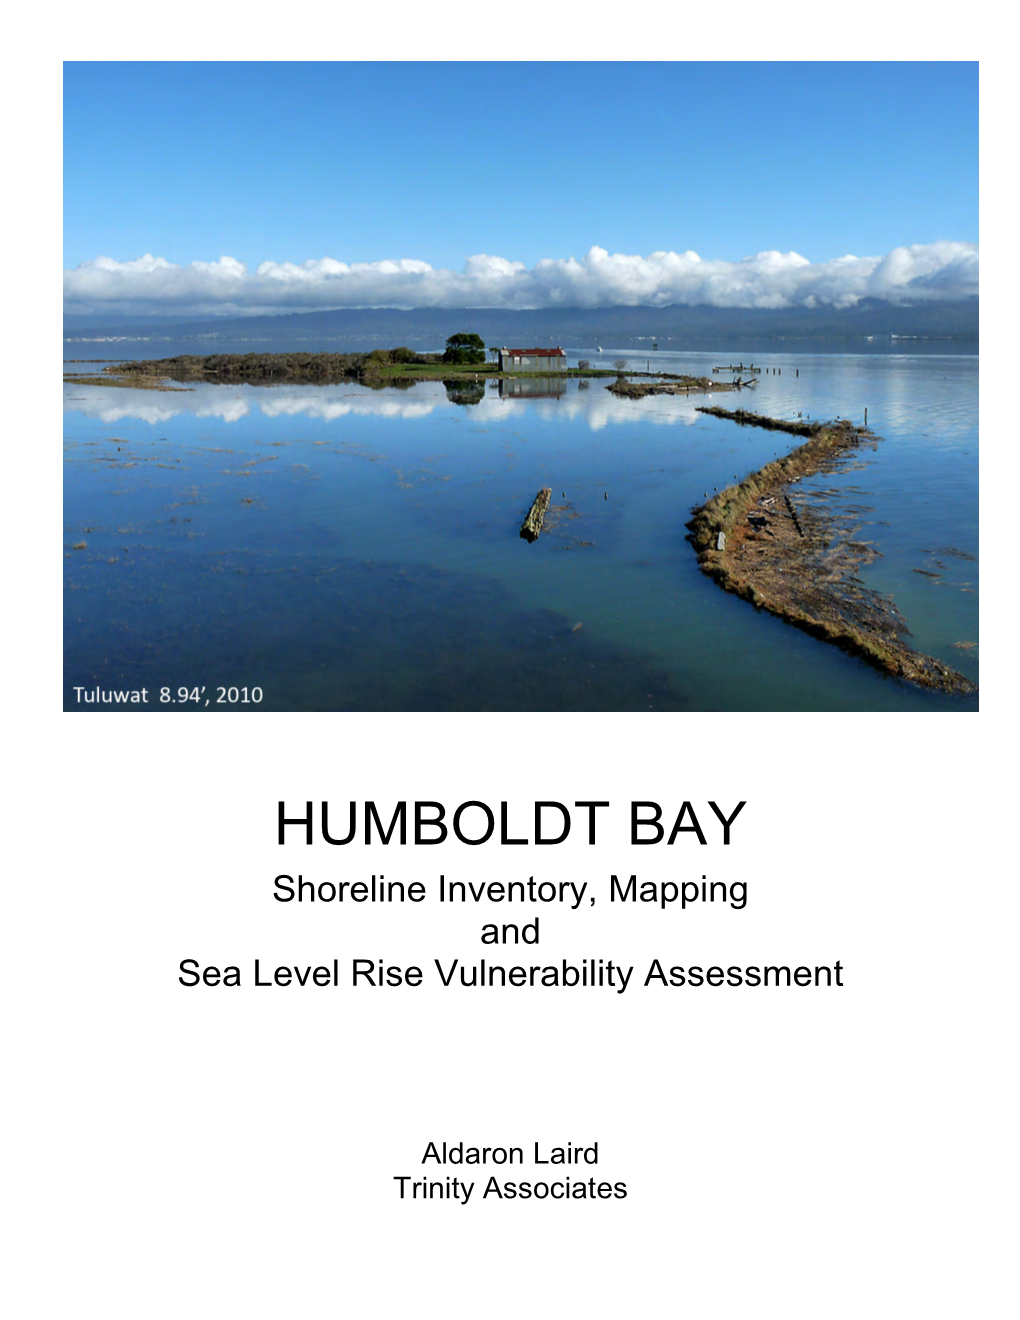 HUMBOLDT BAY Shoreline Inventory, Mapping and Sea Level Rise Vulnerability Assessment